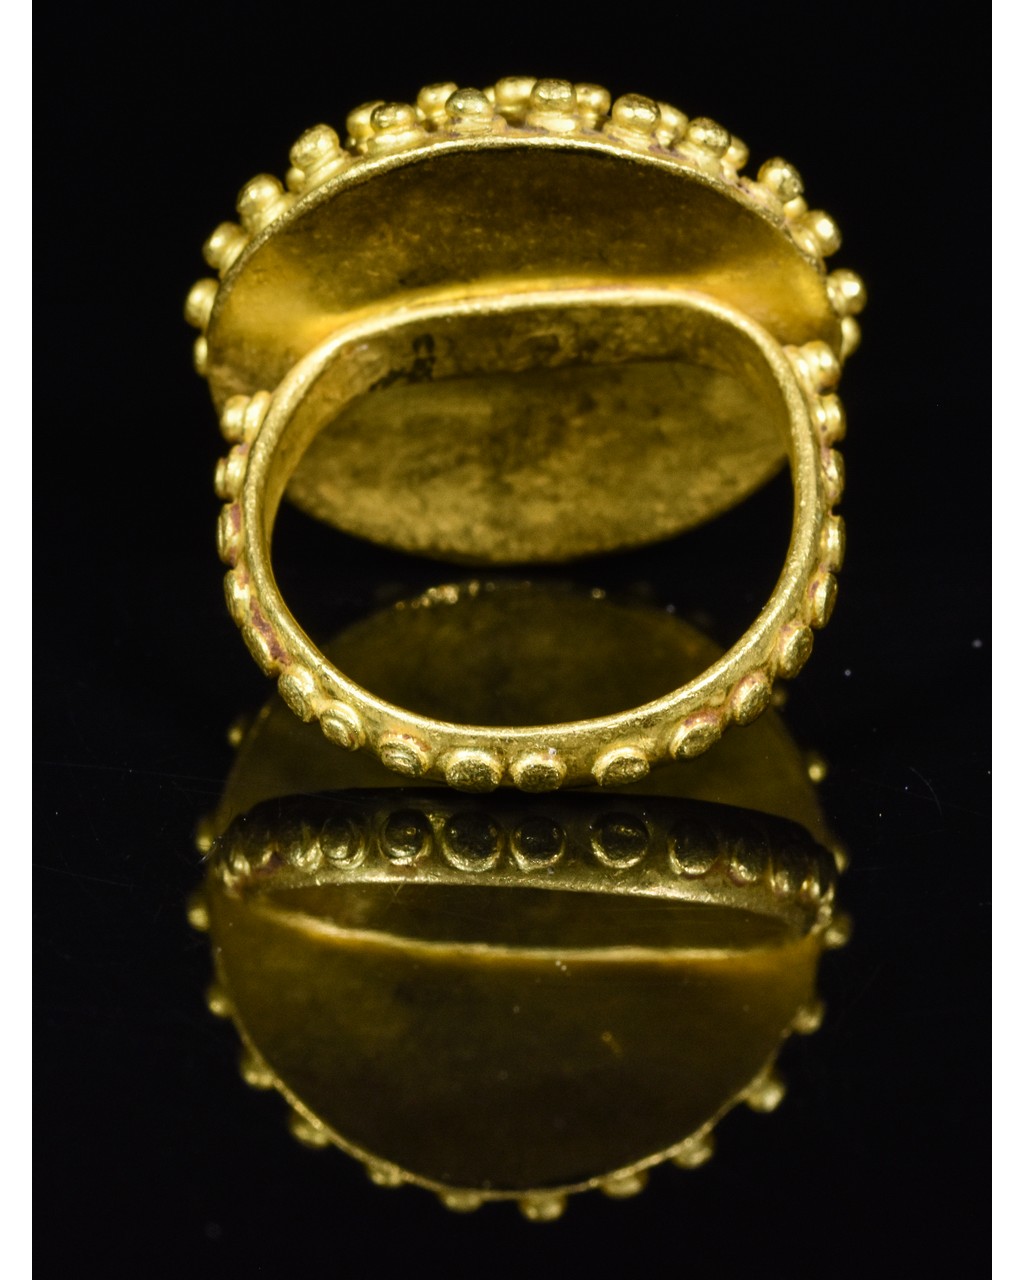 ROMAN GOLD RING WITH GARNET STONE - Image 4 of 5